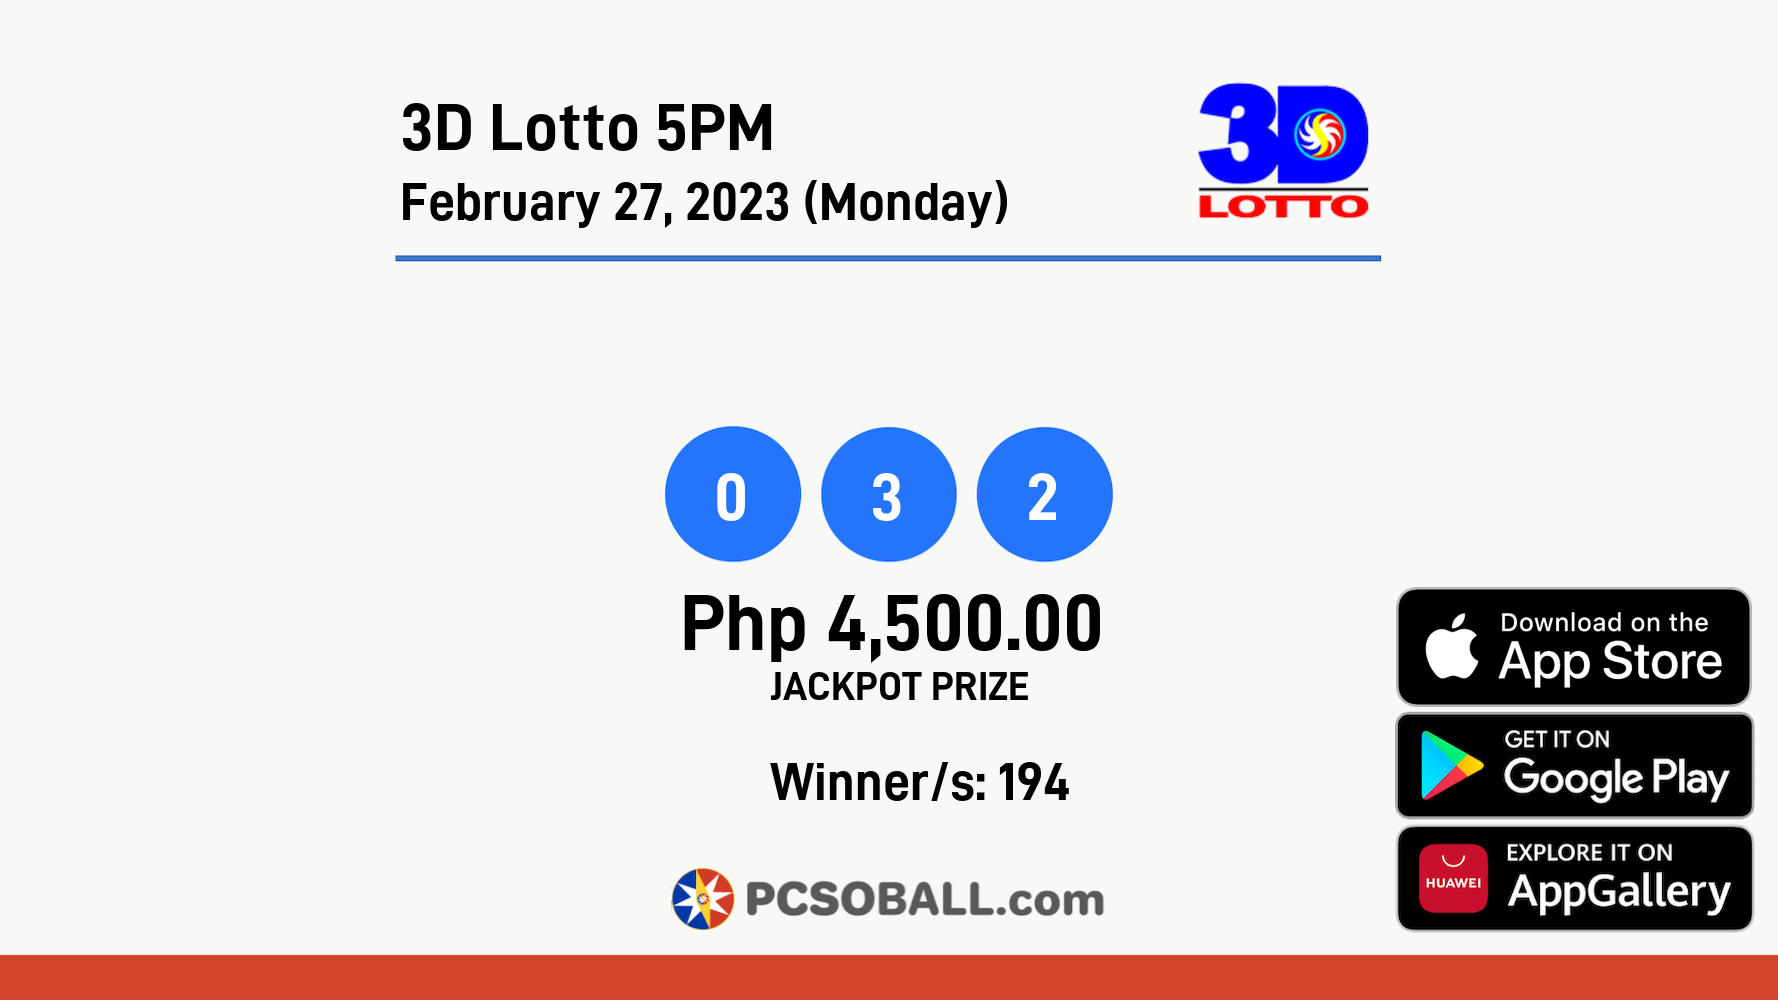 3D Lotto 5PM February 27, 2023 (Monday) Result